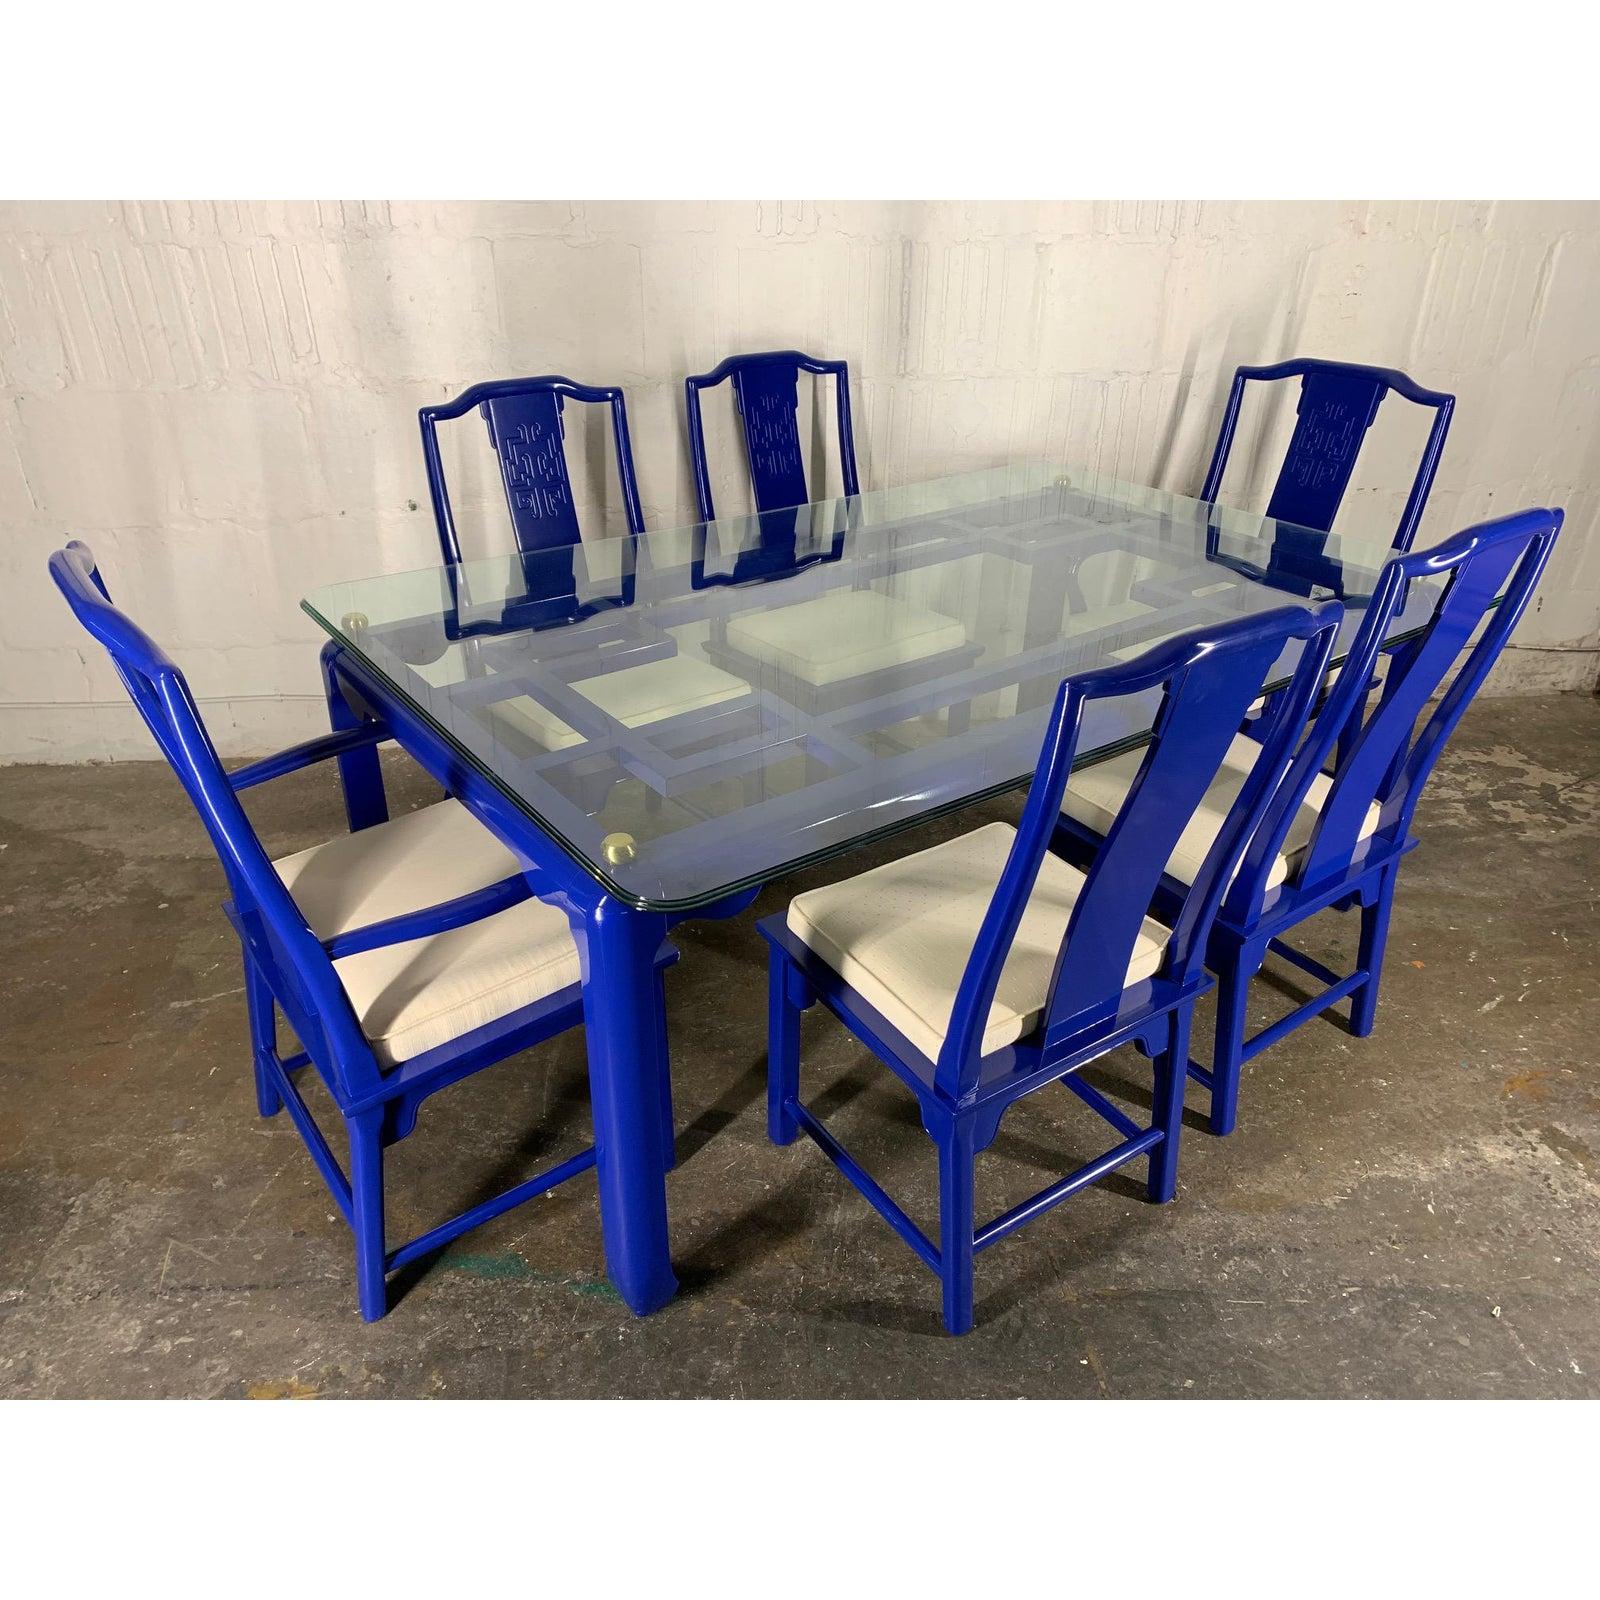 7-piece dining set by Century Furniture. Part of the Chin Hua collection by Raymond Sabota. Asian chinoiserie style newly lacquered in high gloss blue. Original seat upholstery has some slight discolorations. Glass top measures 72